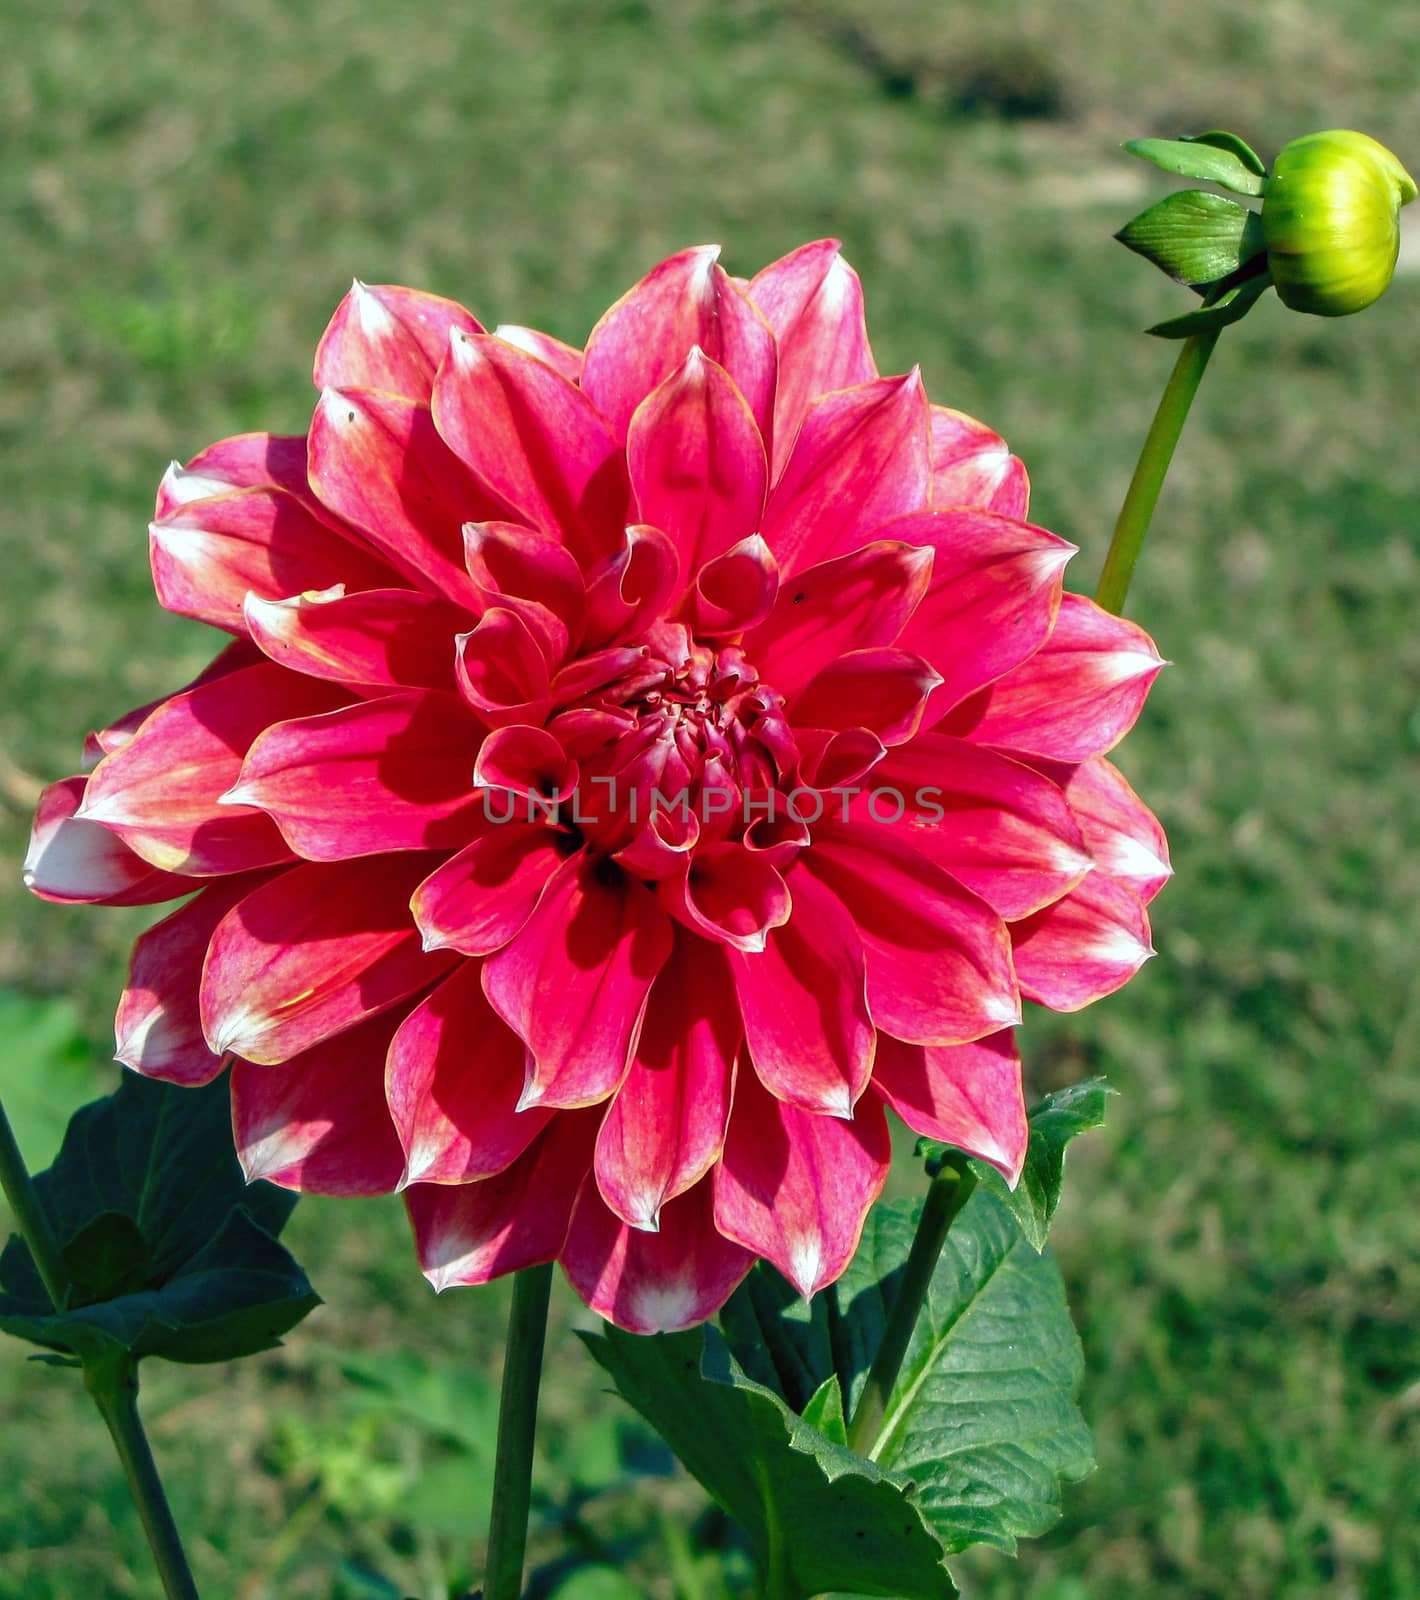 Isolated pink Dahlia flower shinning in Sunlight. 
Dahlia is a genus of bushy, tuberous, herbaceous perennial plants native to Mexico and Central America.